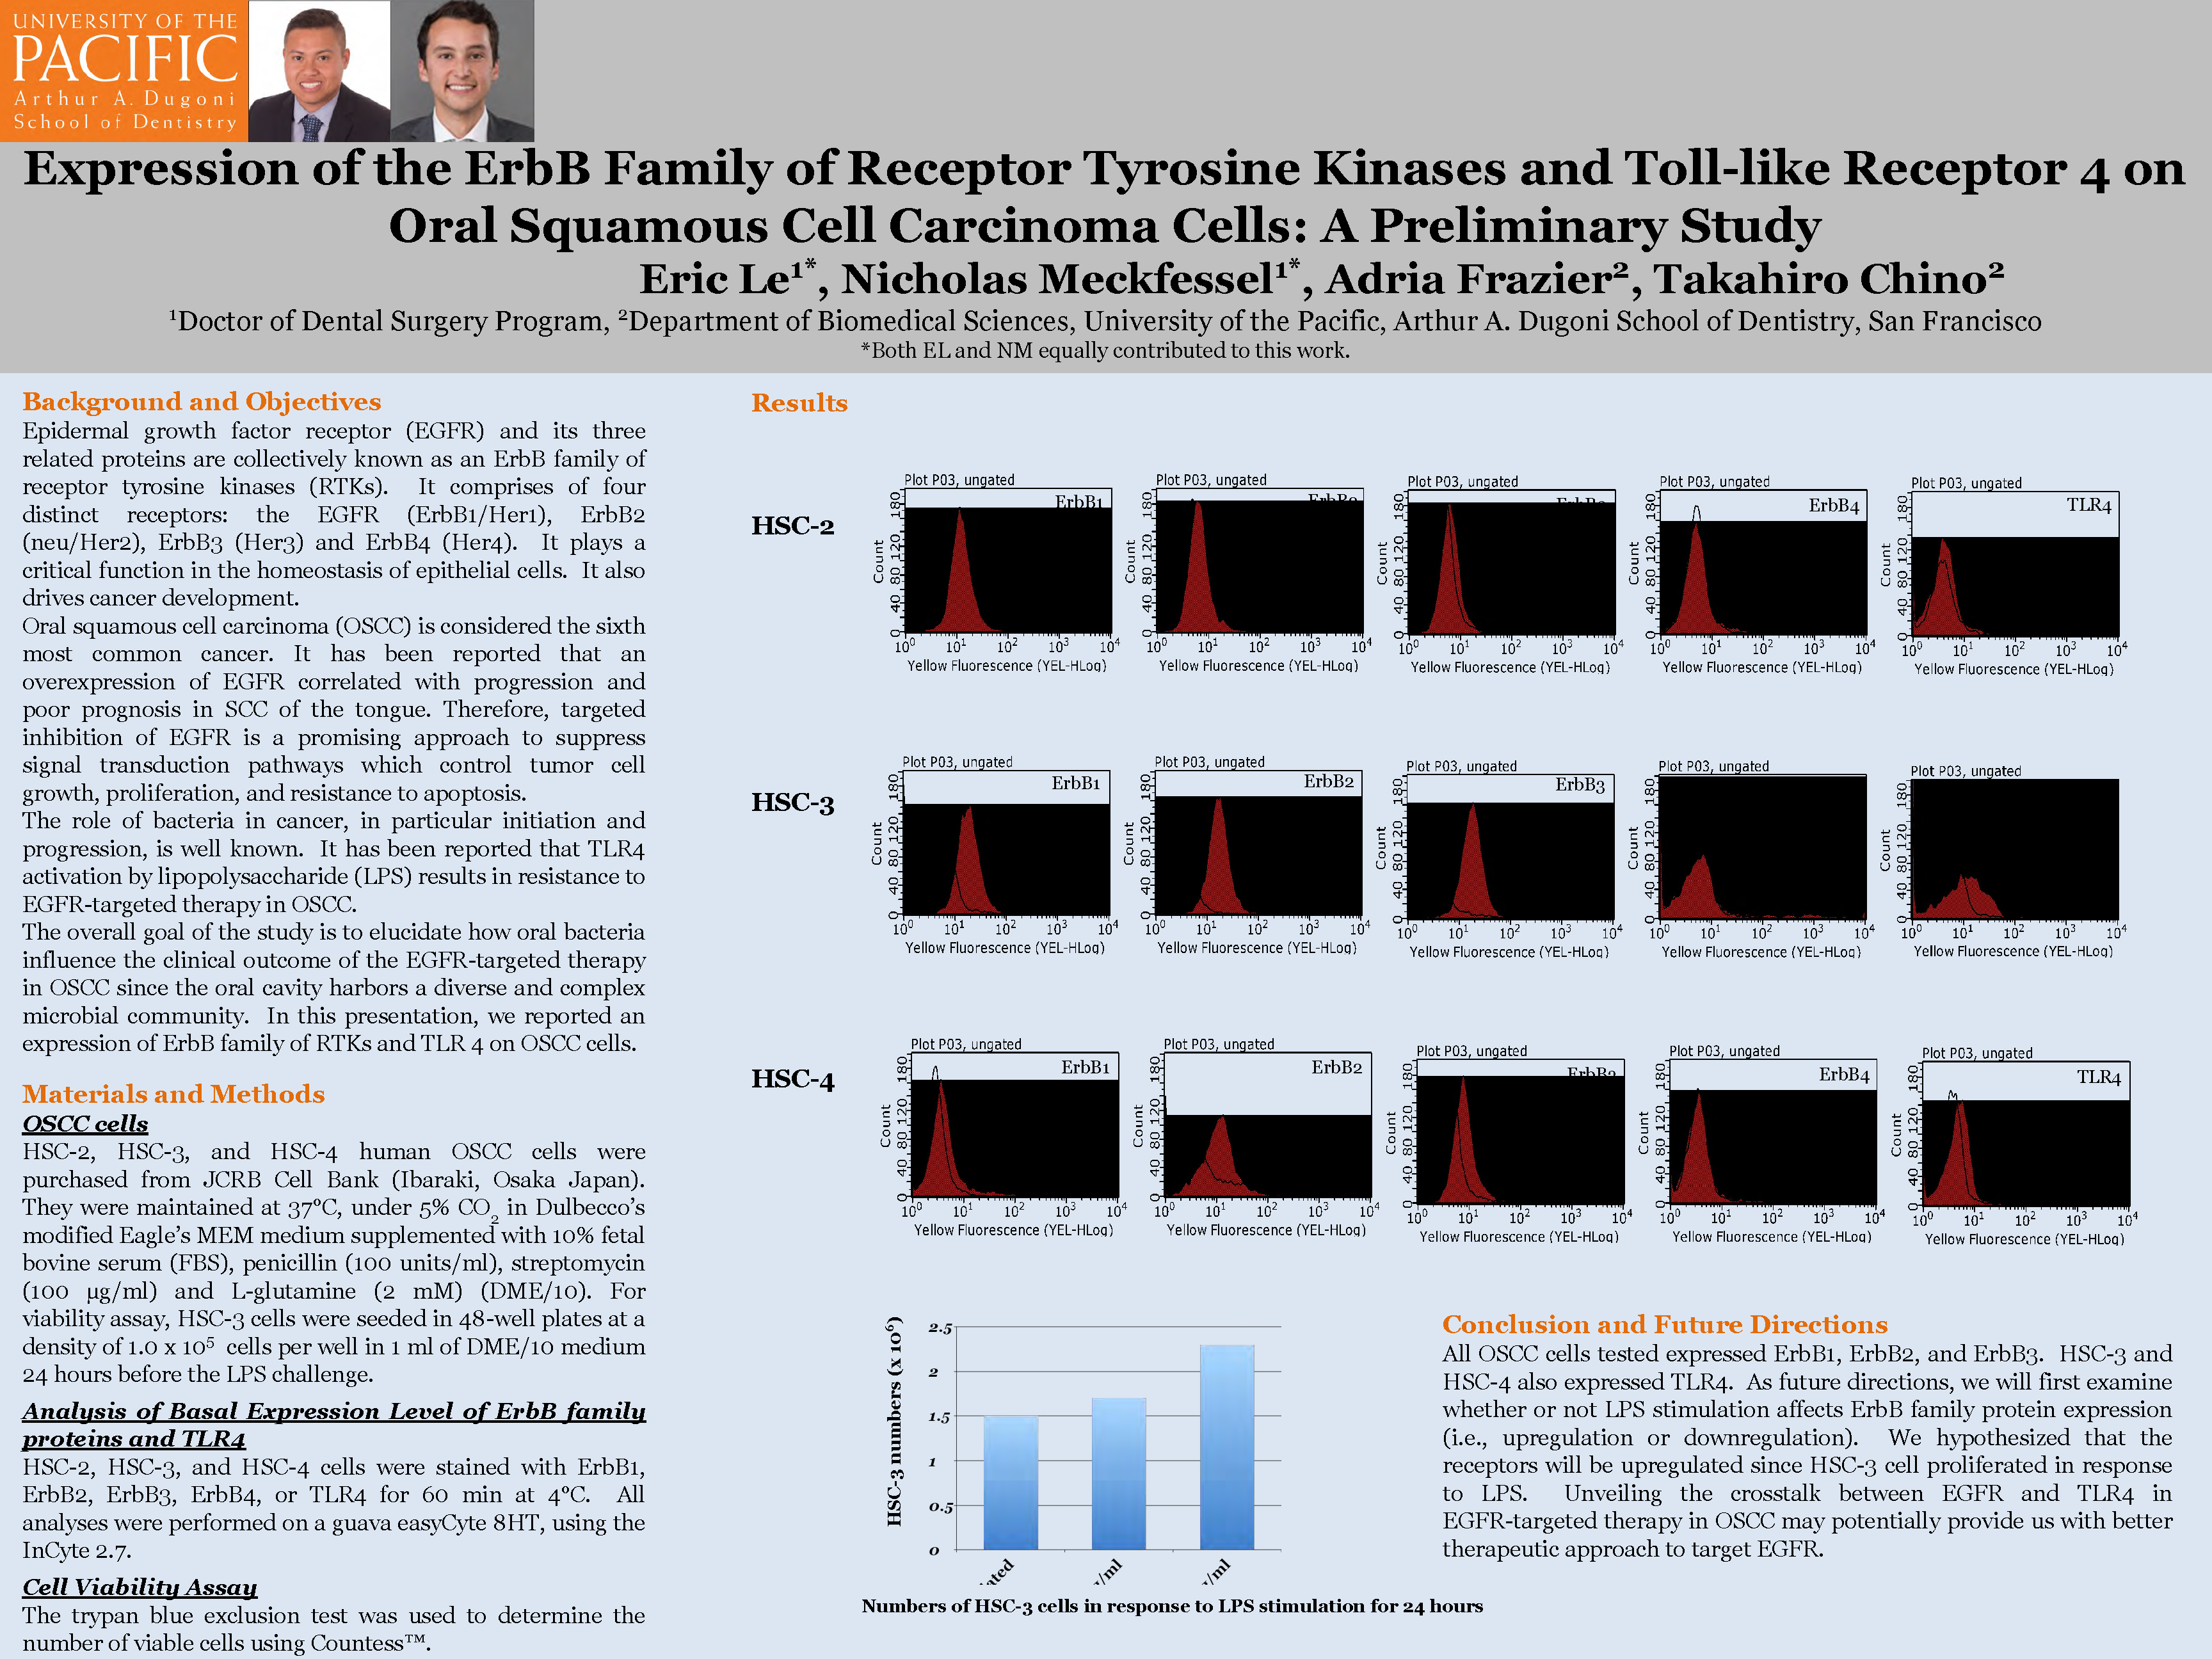 Expression of the ErbB Family of Receptor Tyrosine Kinases and Toll-like Receptor 4 on Oral Squamous Cell Carcinoma Cells: A Preliminary Study